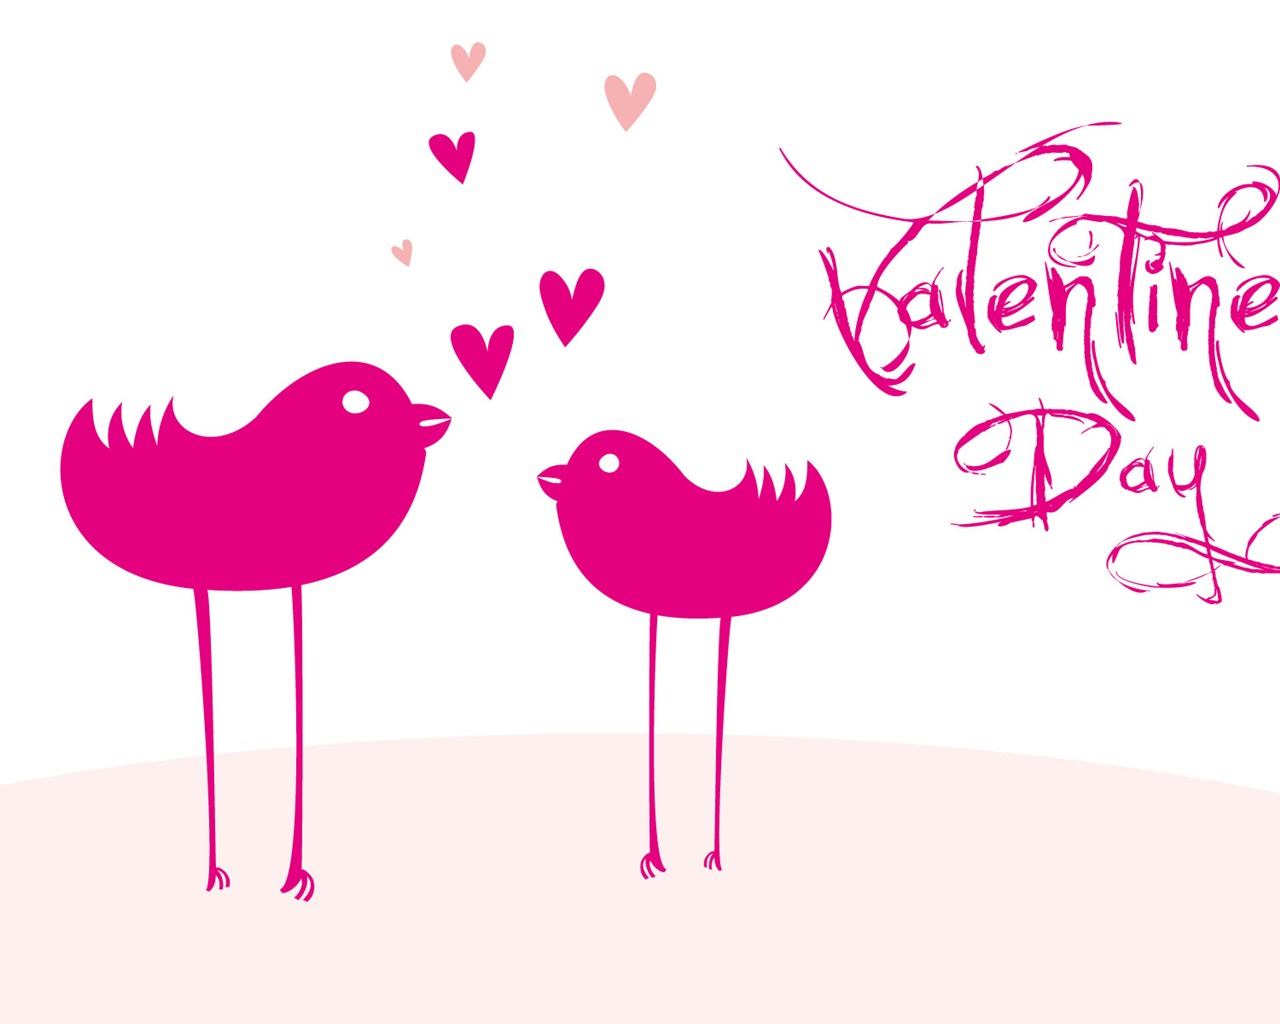 Valentine's Day Love Theme Wallpapers #37 - 1280x1024